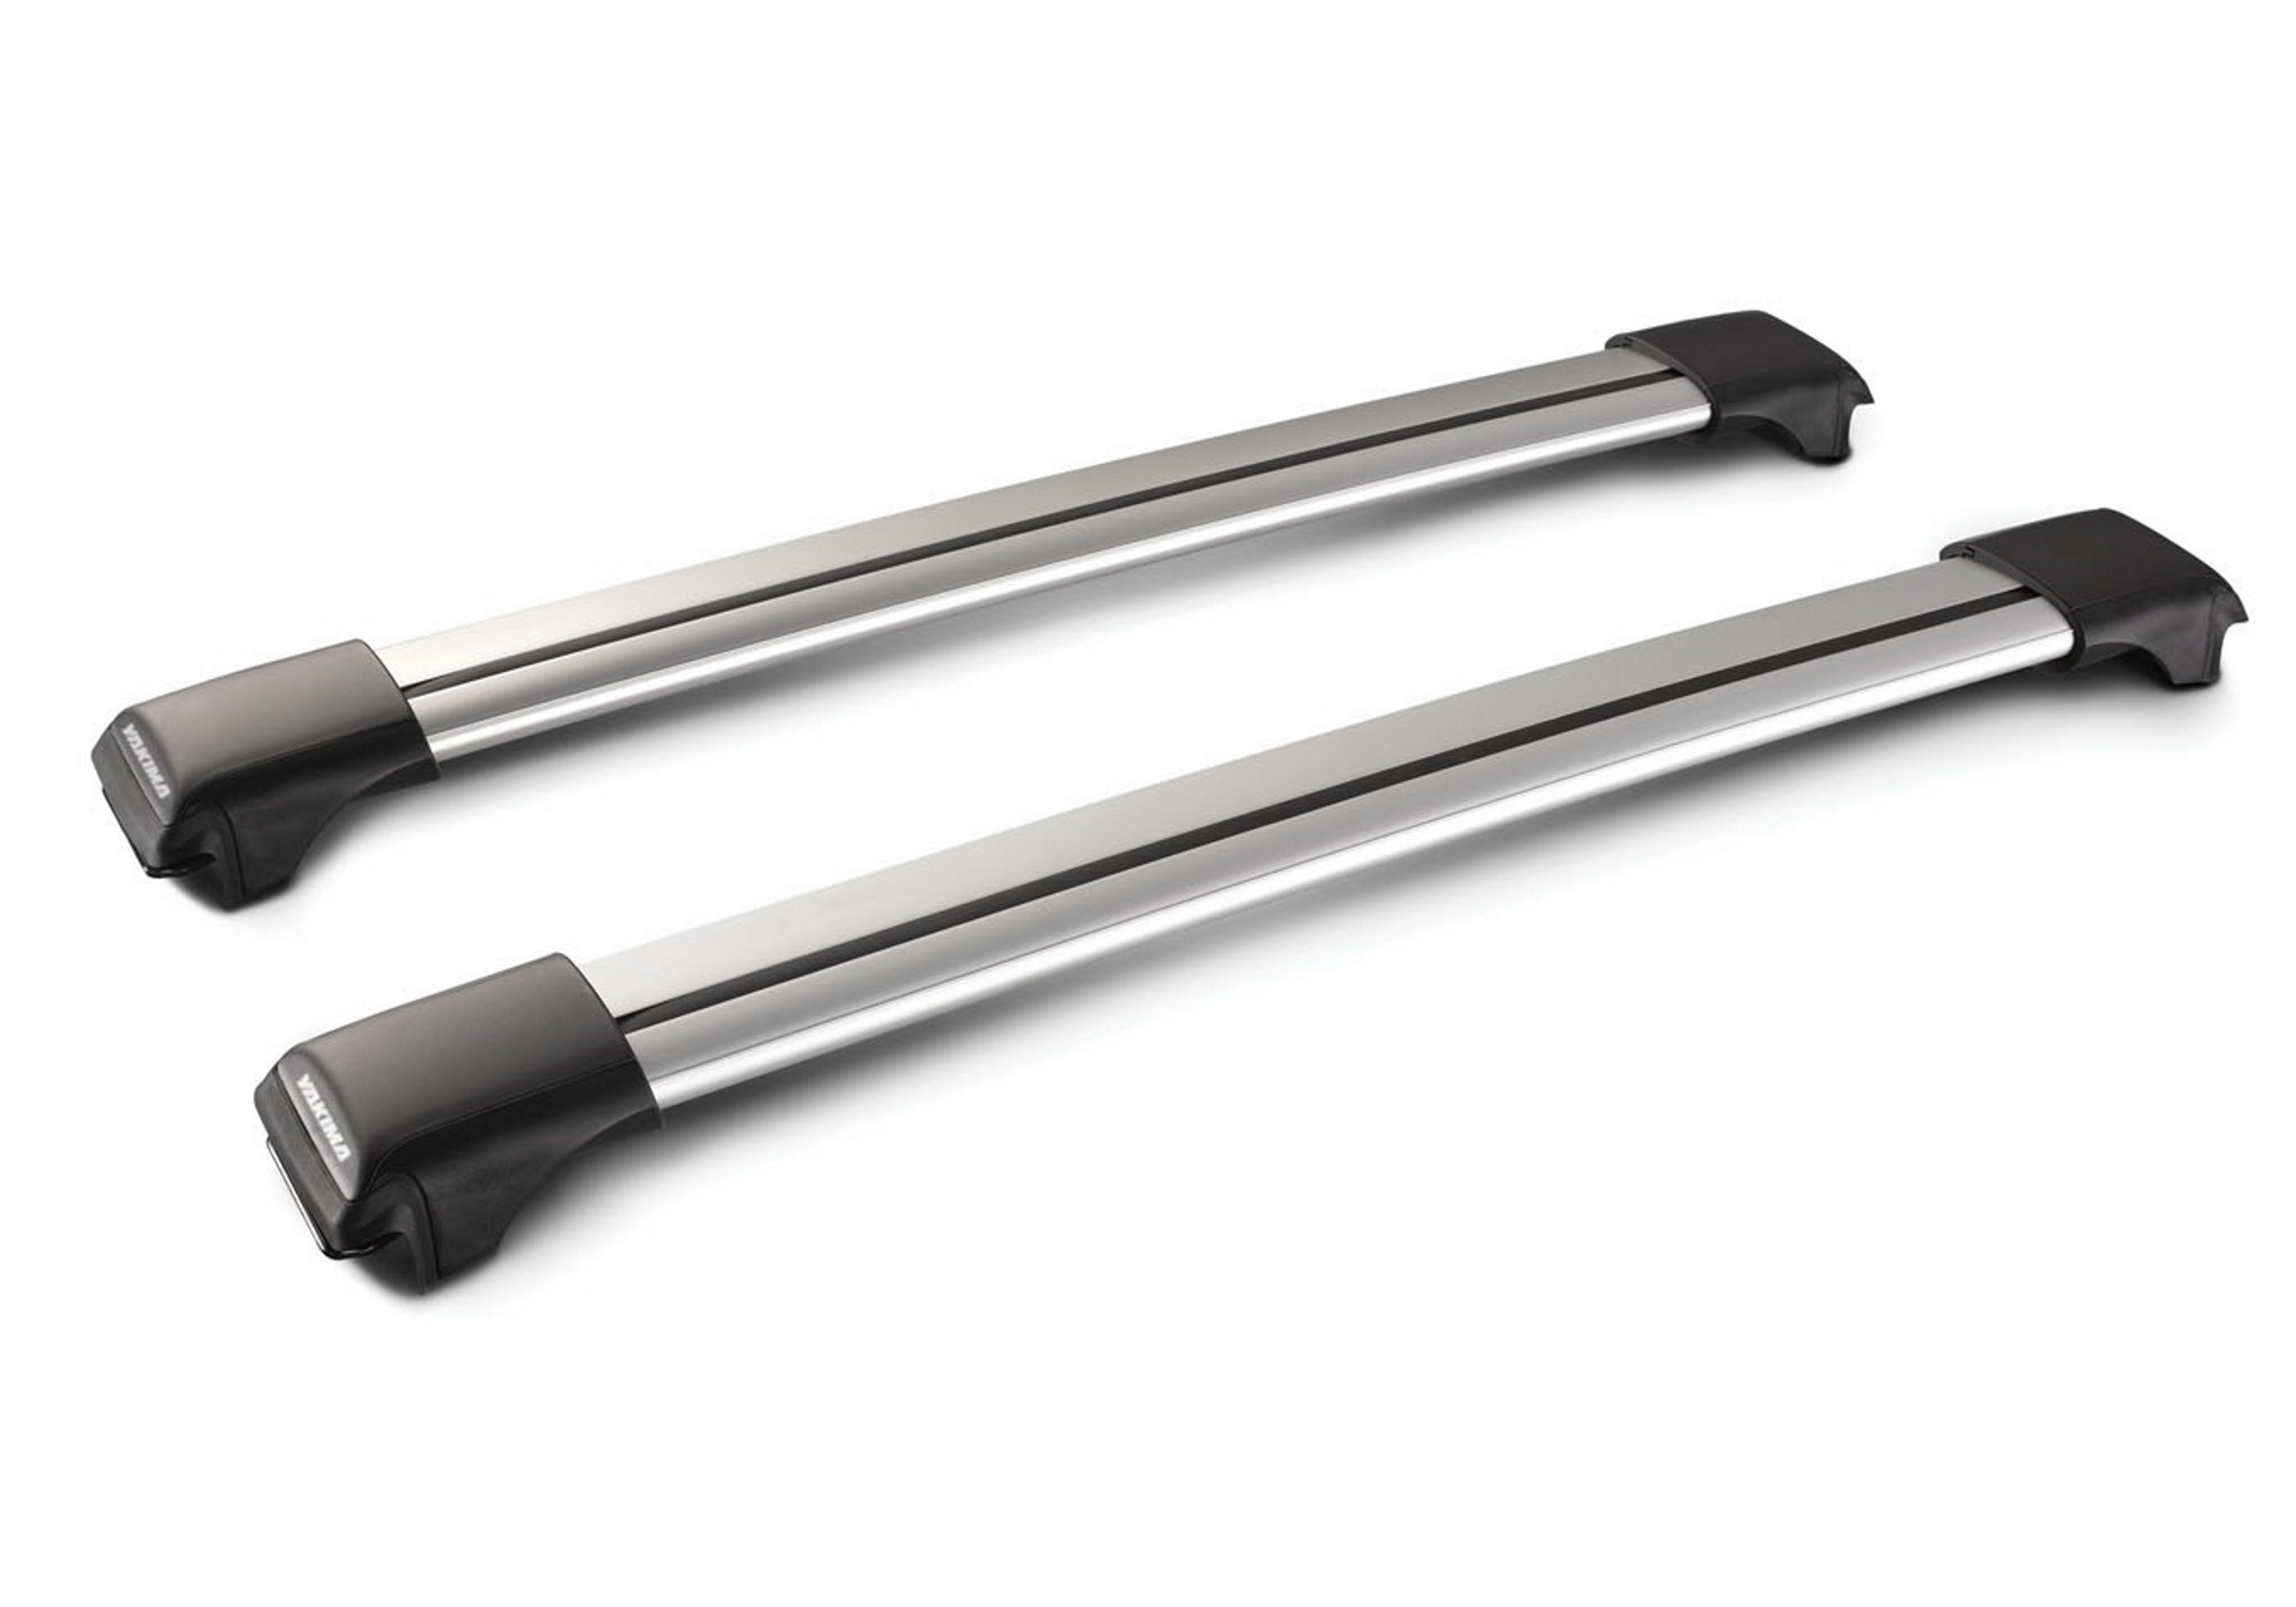 BMW 5 series Touring (2004 to 2010):Yakima roof bars package - S45 Aero-X silver bars